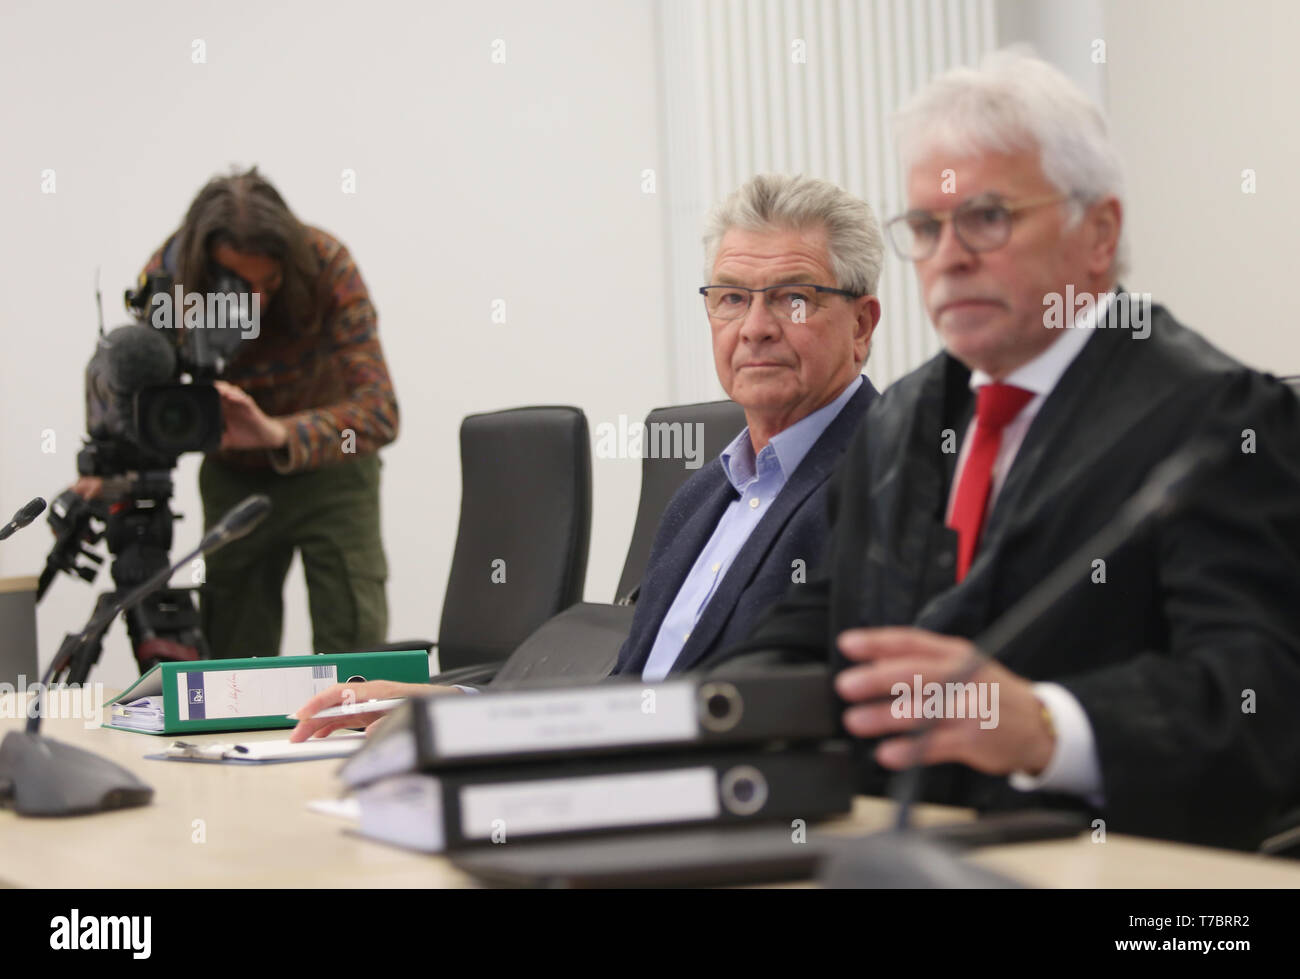 03 May 2019, Mecklenburg-Western Pomerania, Rostock: At the beginning of the trial against Dr. Amandus Krüger (M), the former Managing Director of the People's Solidarity Societies for fraud and delay in insolvency, the defendant sits in the courtroom next to his lawyer Dietmar Rudloff (R). The public prosecutor's office accuses the 68-year-old of being the managing director of Volkssolidarität Sozial-Immobilienfond GmbH & Co. KG (VSI KG) in the period between July 2004 and October 2005 in 144 legally related cases. The man had been sentenced to three years and eight months imprisonment by the Stock Photo